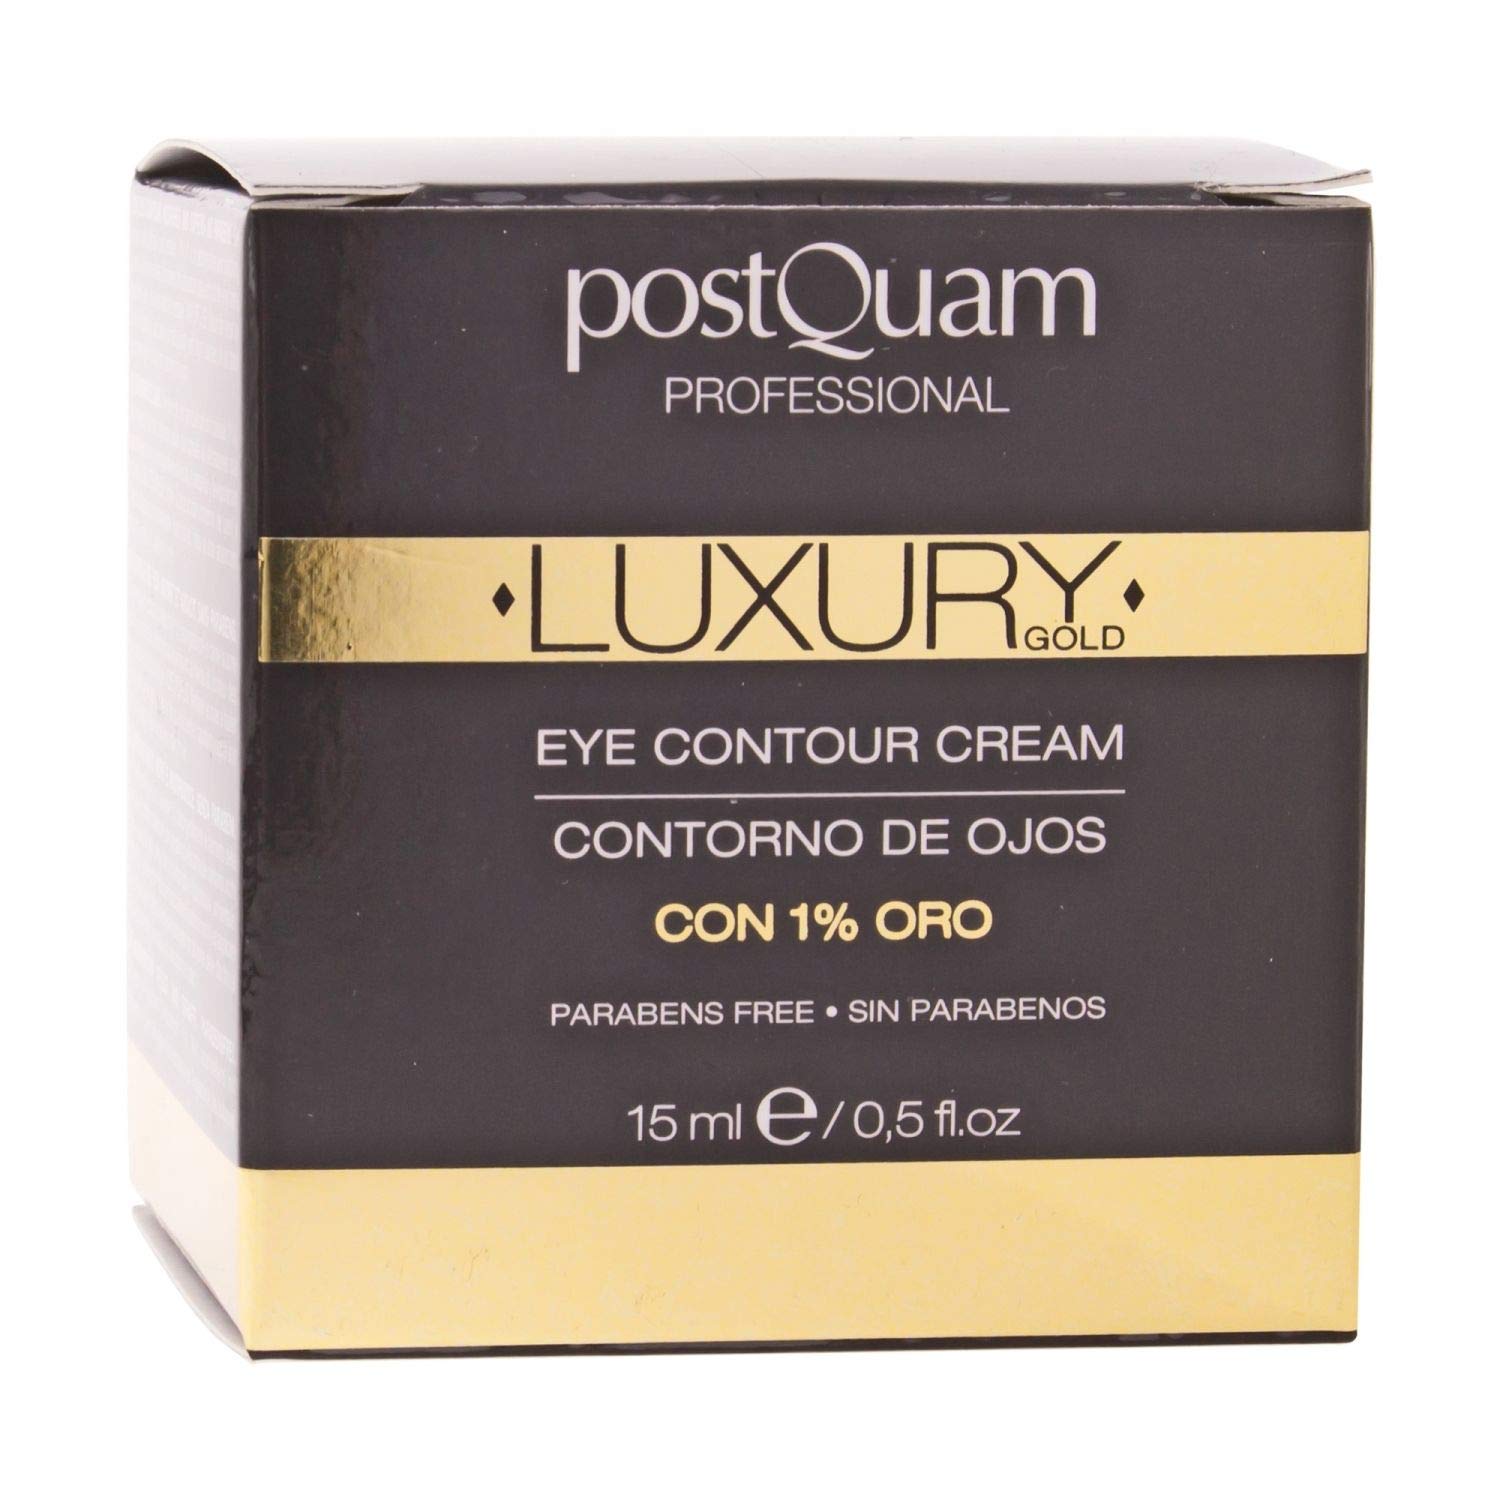 POSTQUAM Professional Luxury Gold Eye Contour Cream 15ml – Spanish Beauty - Hyaluronic Acid - Helps Minimize Wrinkles & Expression Lines - to Soothe the Eye Area - Active Ingredients